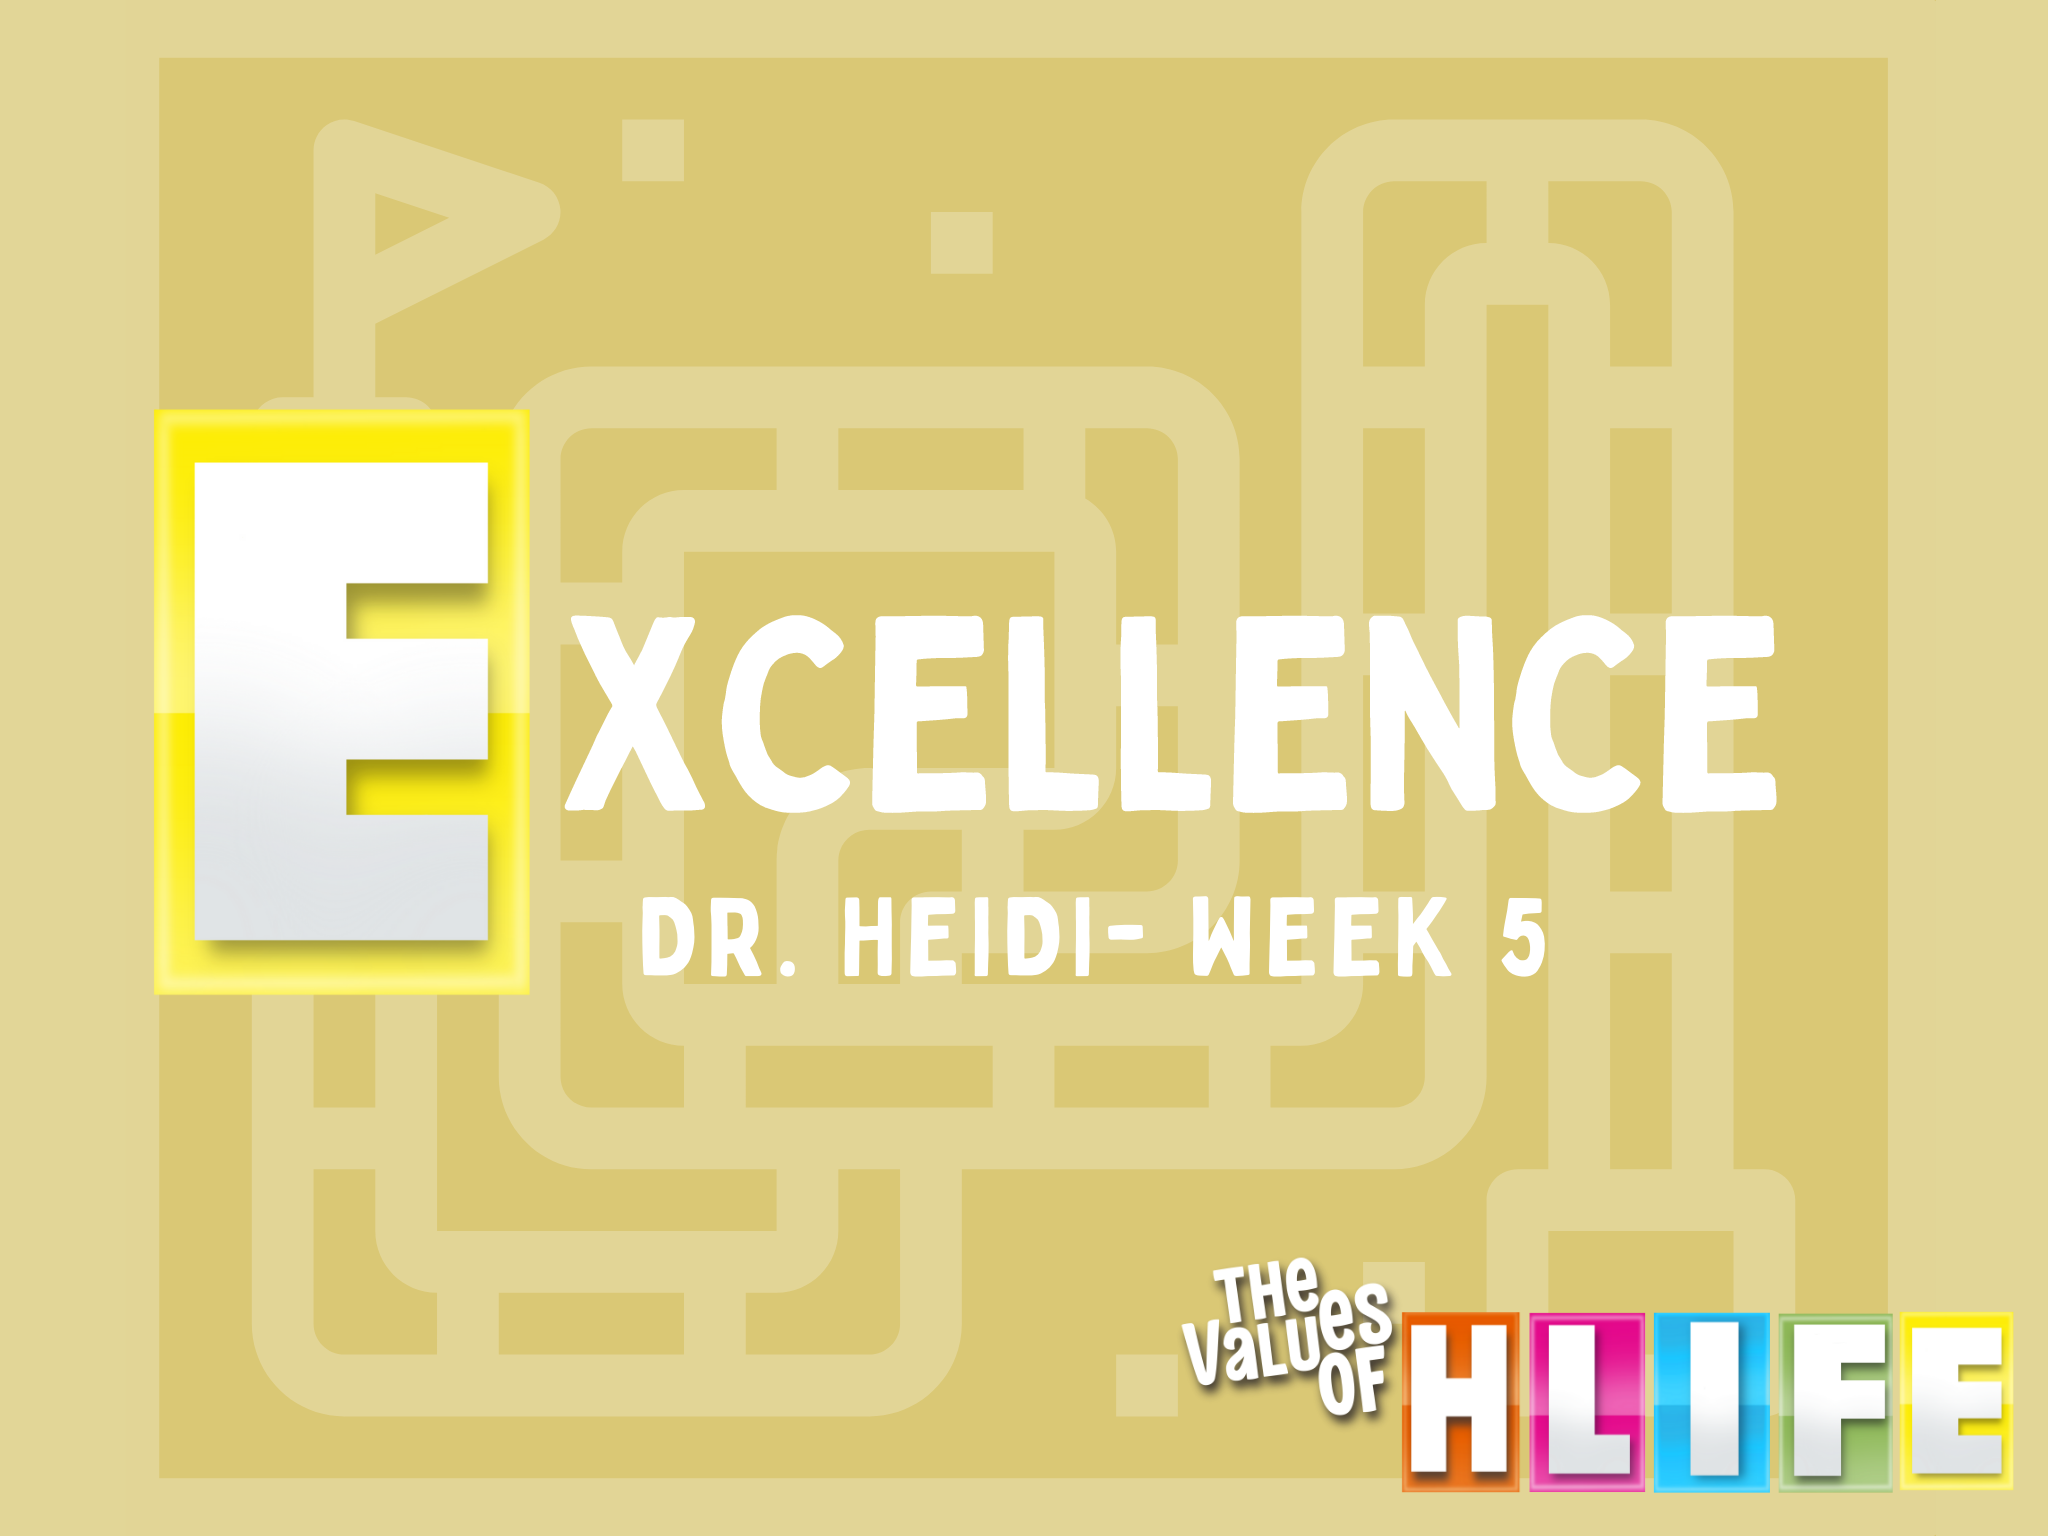 H-LIFE on "Excellence"